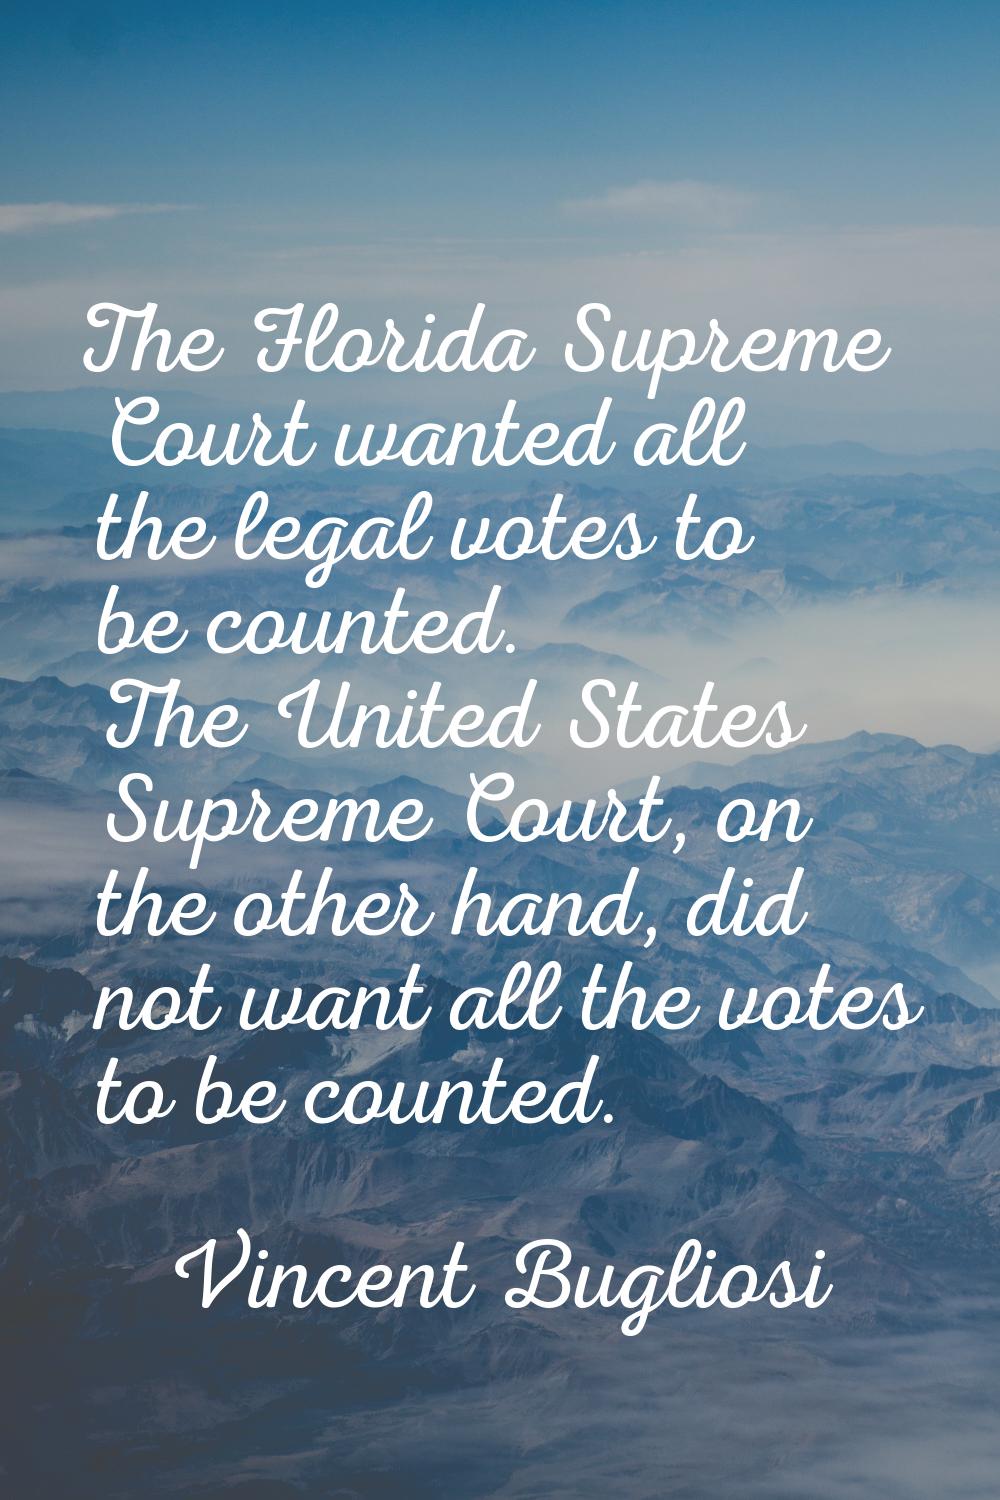 The Florida Supreme Court wanted all the legal votes to be counted. The United States Supreme Court